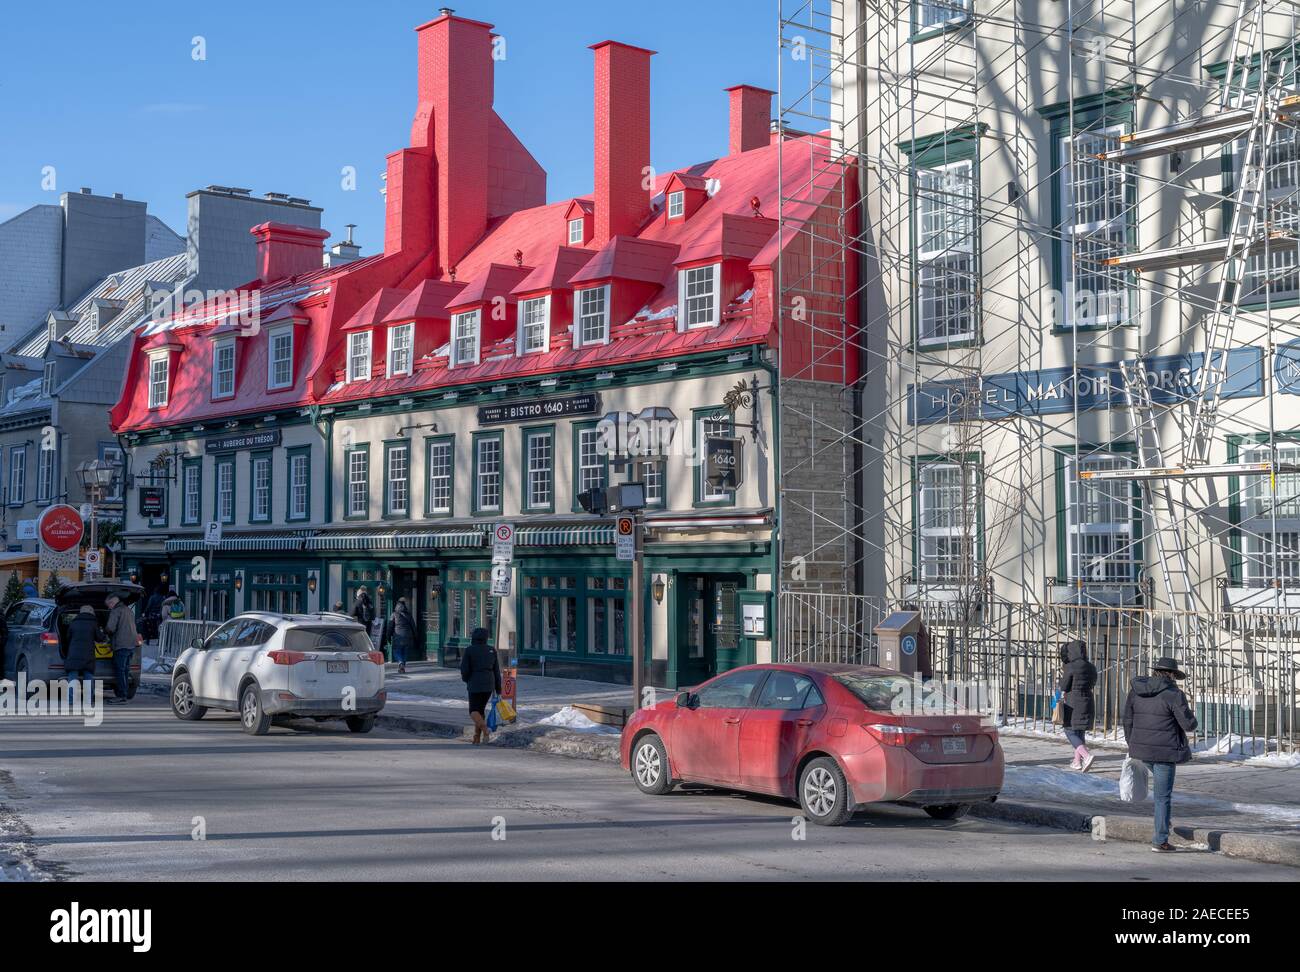 Quebec City, Quebec, Canada -- November 30, 2019. A photo of a side street in Quebec (rue St. Anne) with the popular red roofed Bistro 1640. Stock Photo